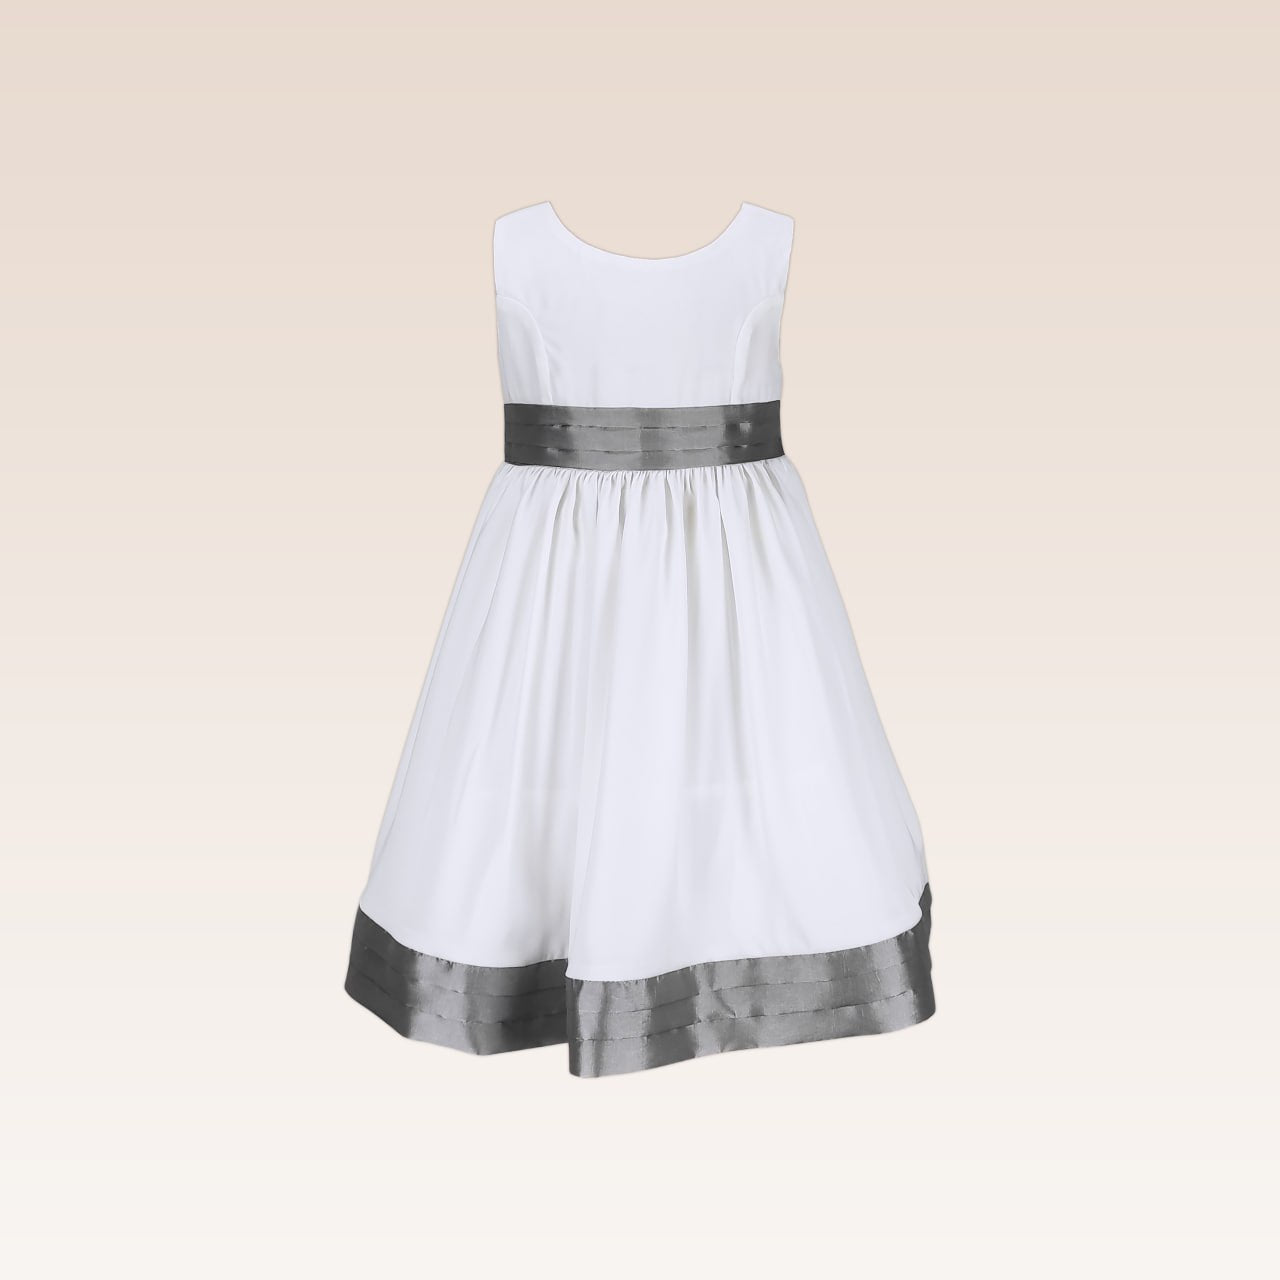 Fiona Girls White Party Dress with Pleating Details on Waist and Hem